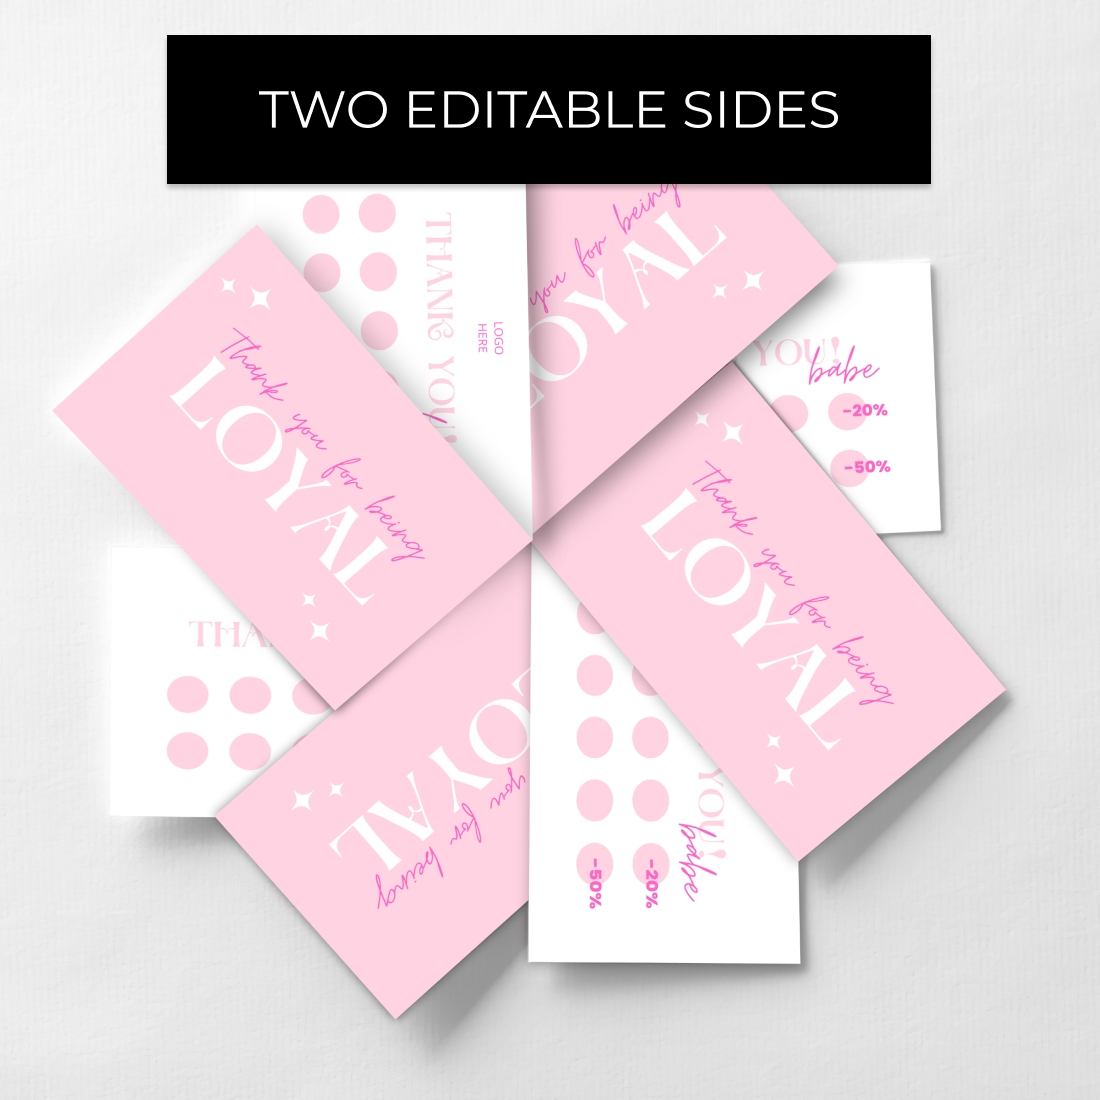 Printable Loyalty Card Template Canva facebook image.